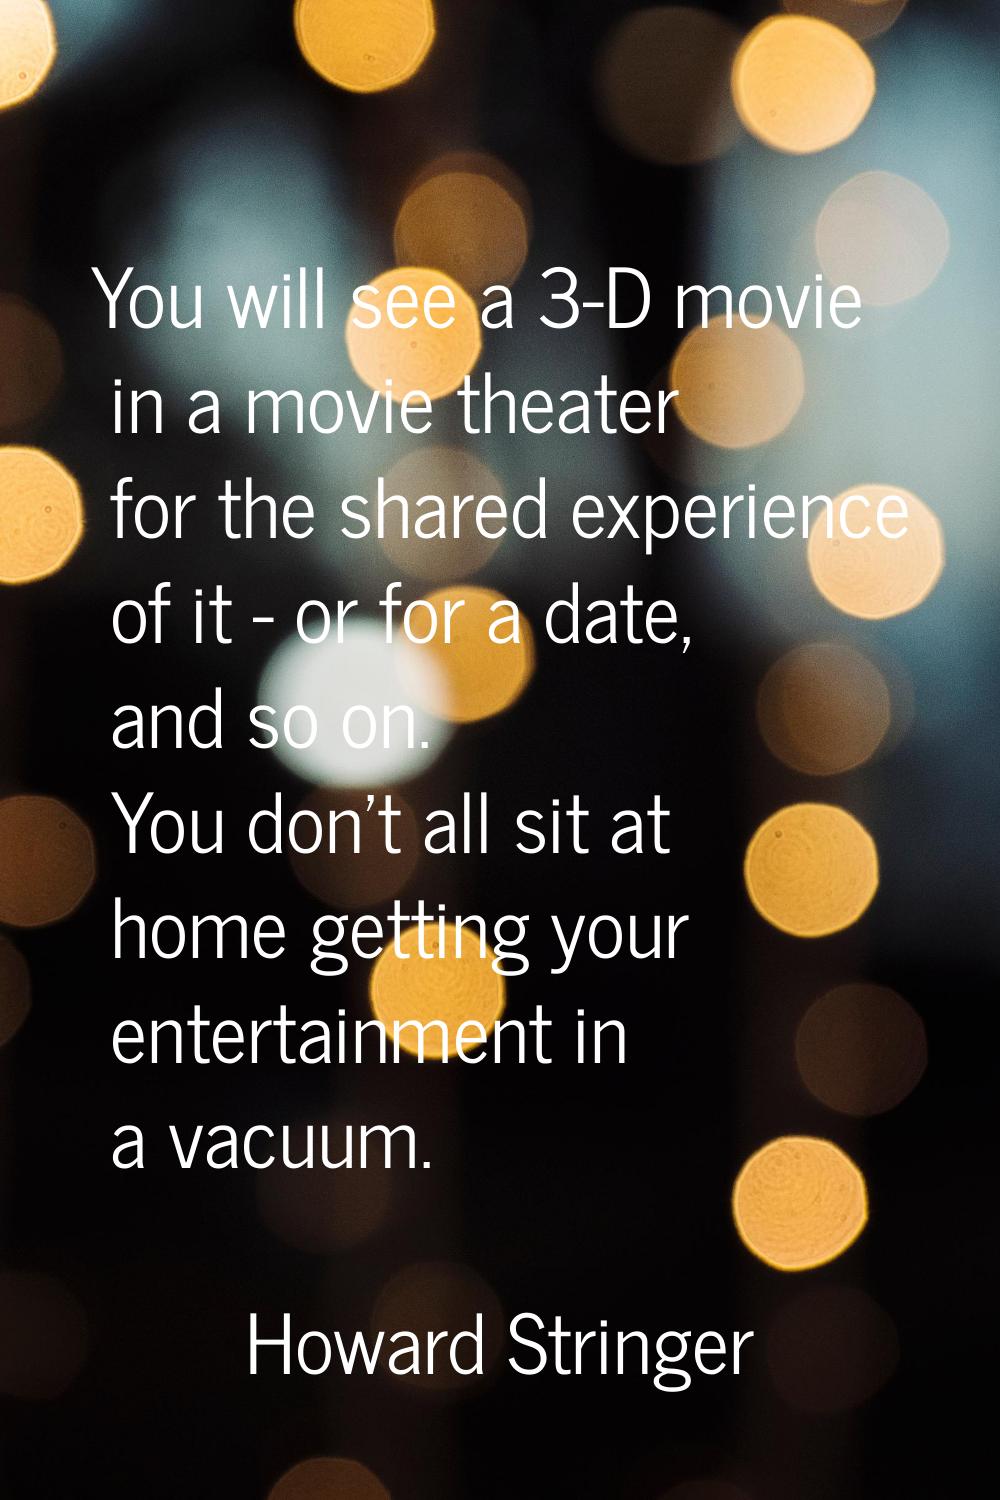 You will see a 3-D movie in a movie theater for the shared experience of it - or for a date, and so